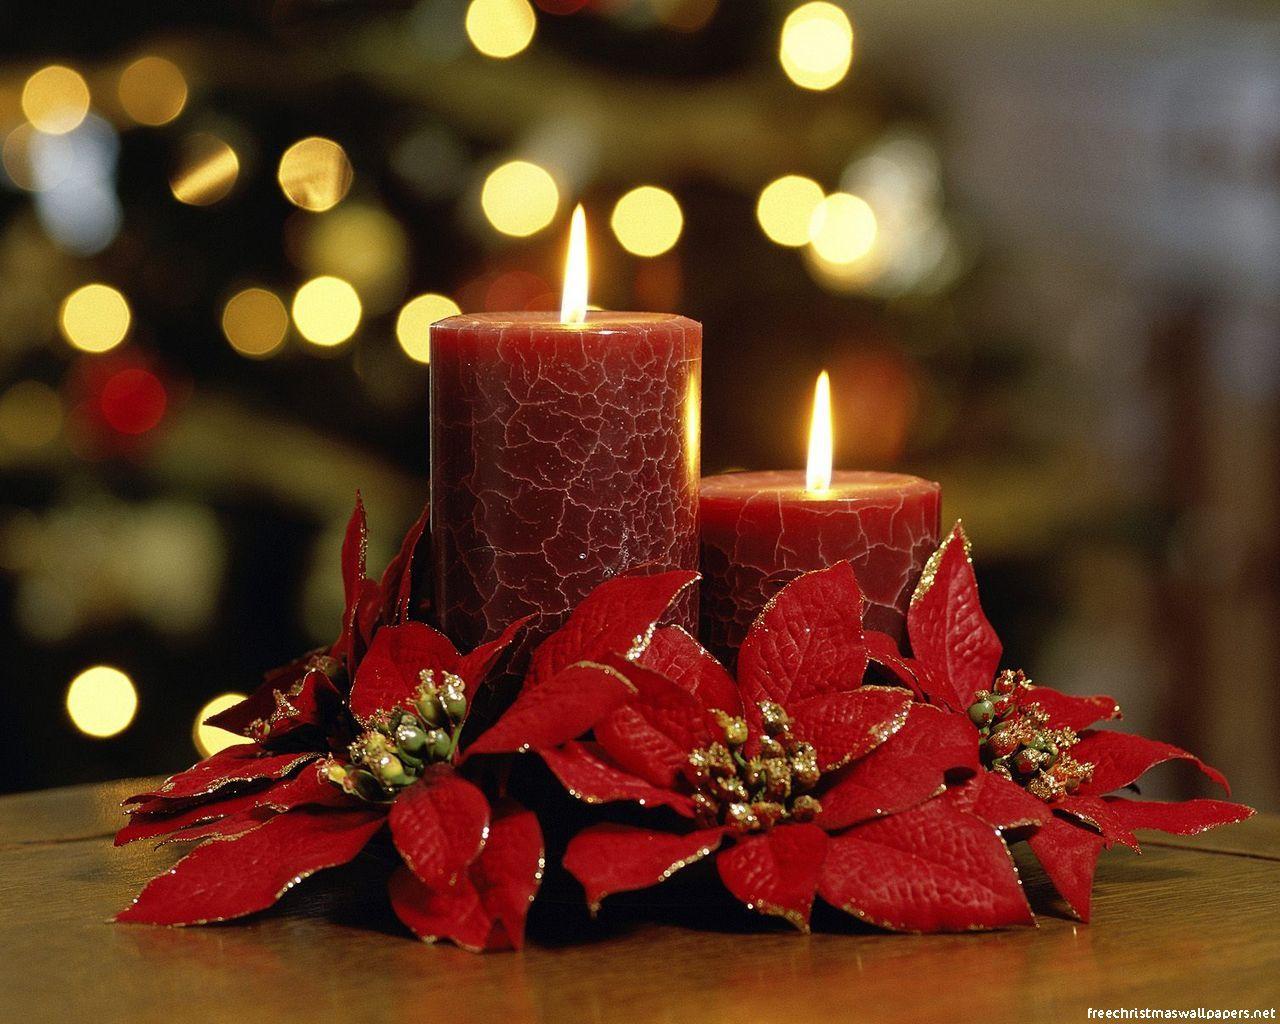 Christmas Candle Decorating Ideas. Christmas candle